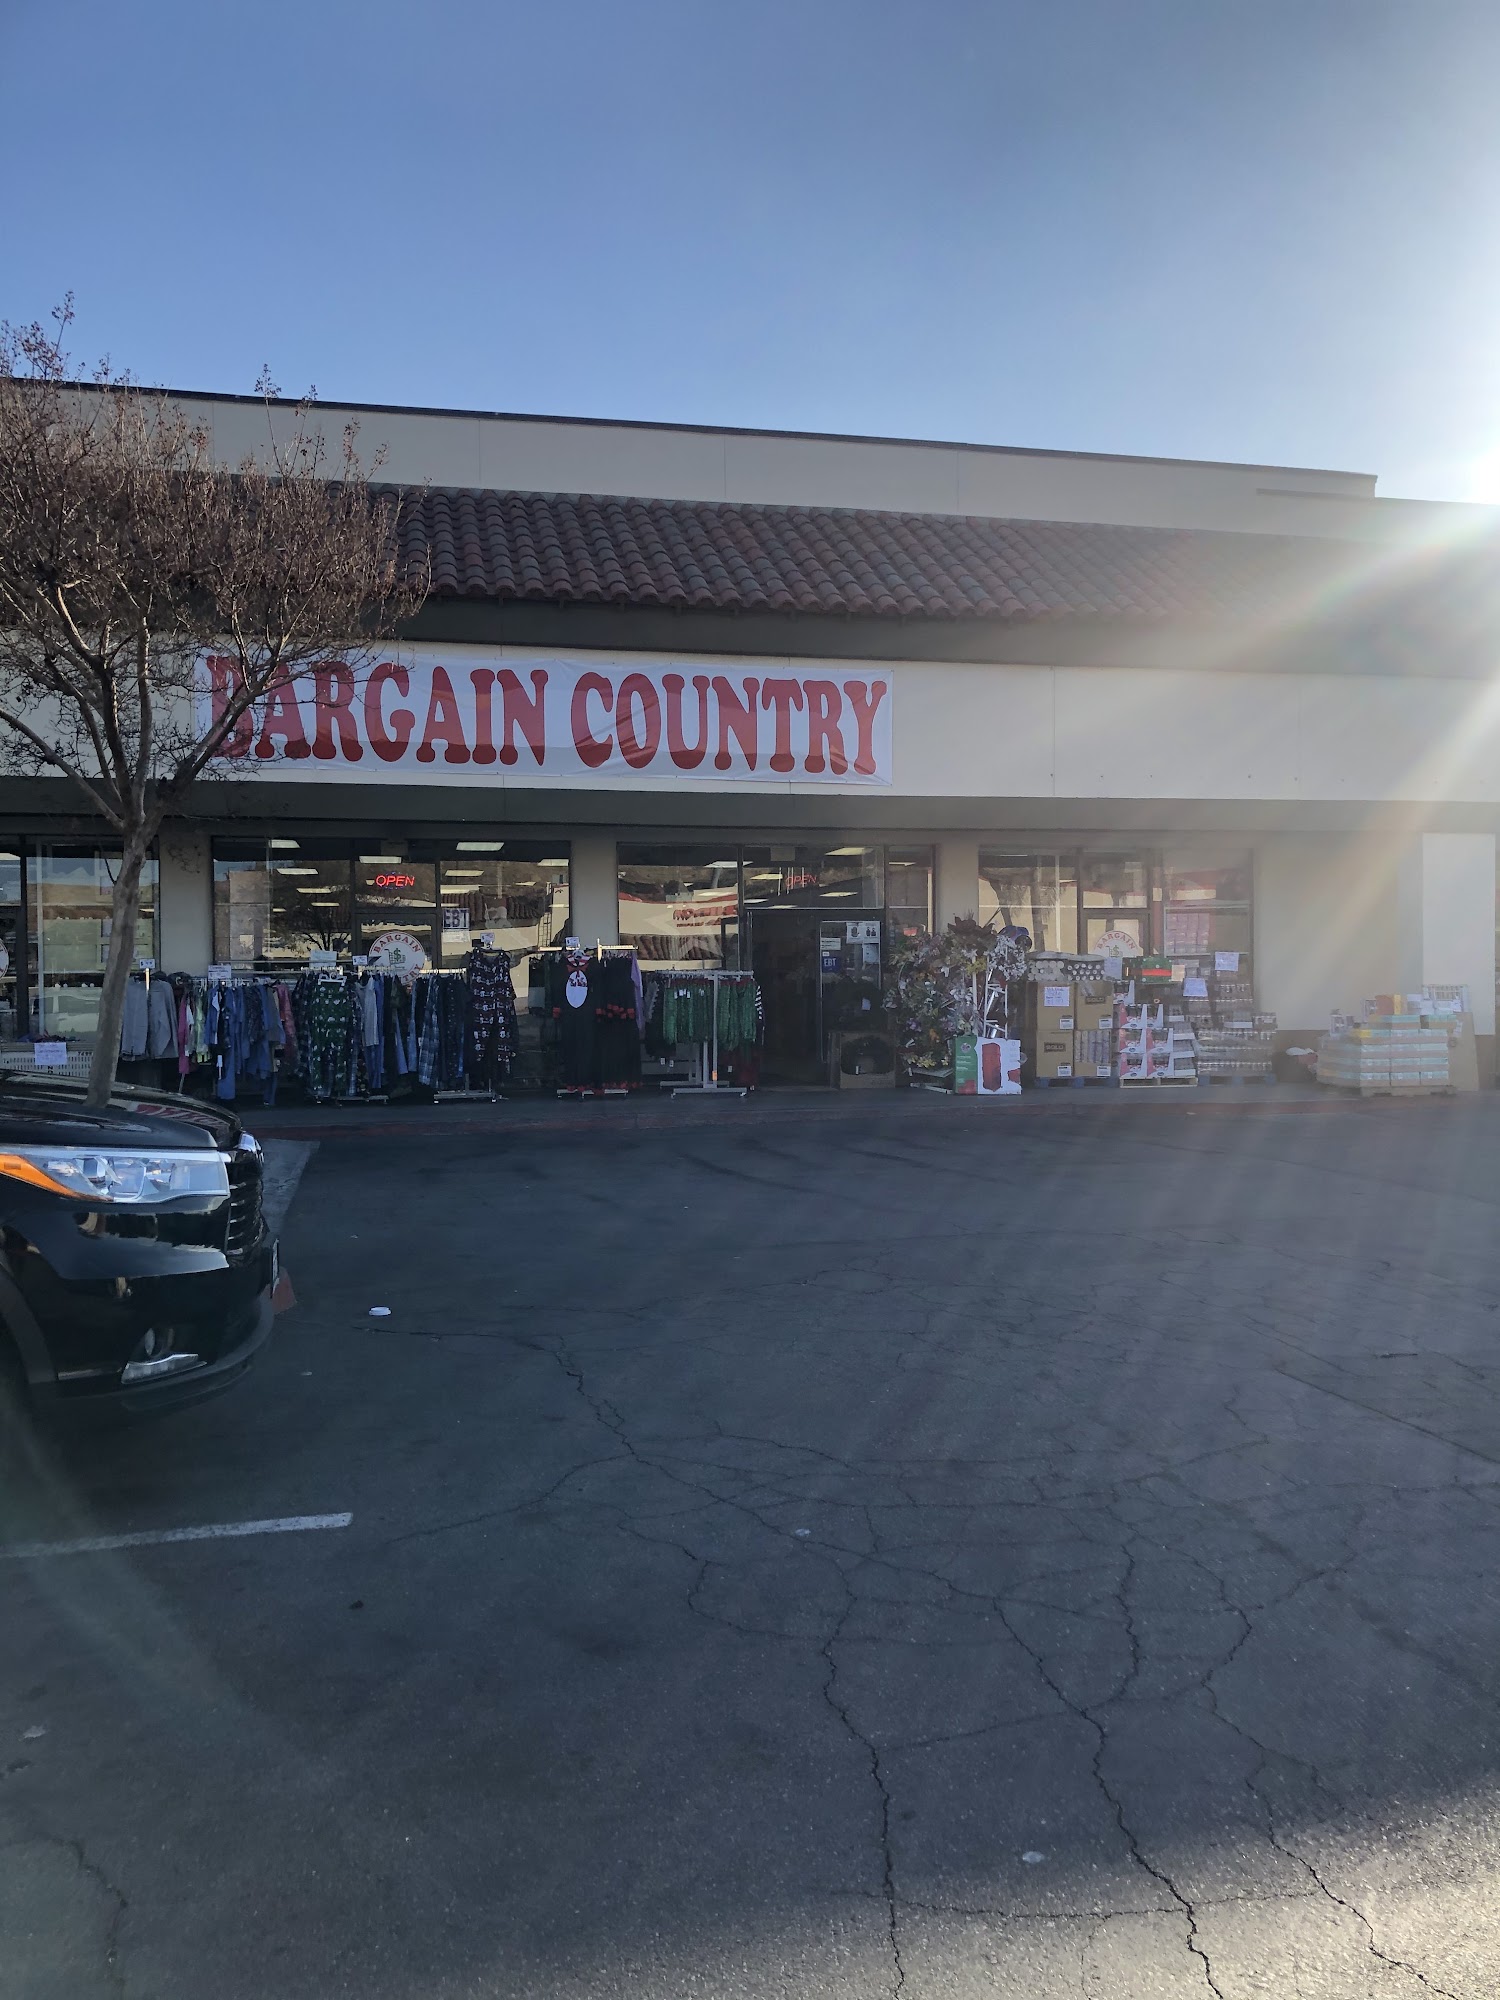 Bargain Country